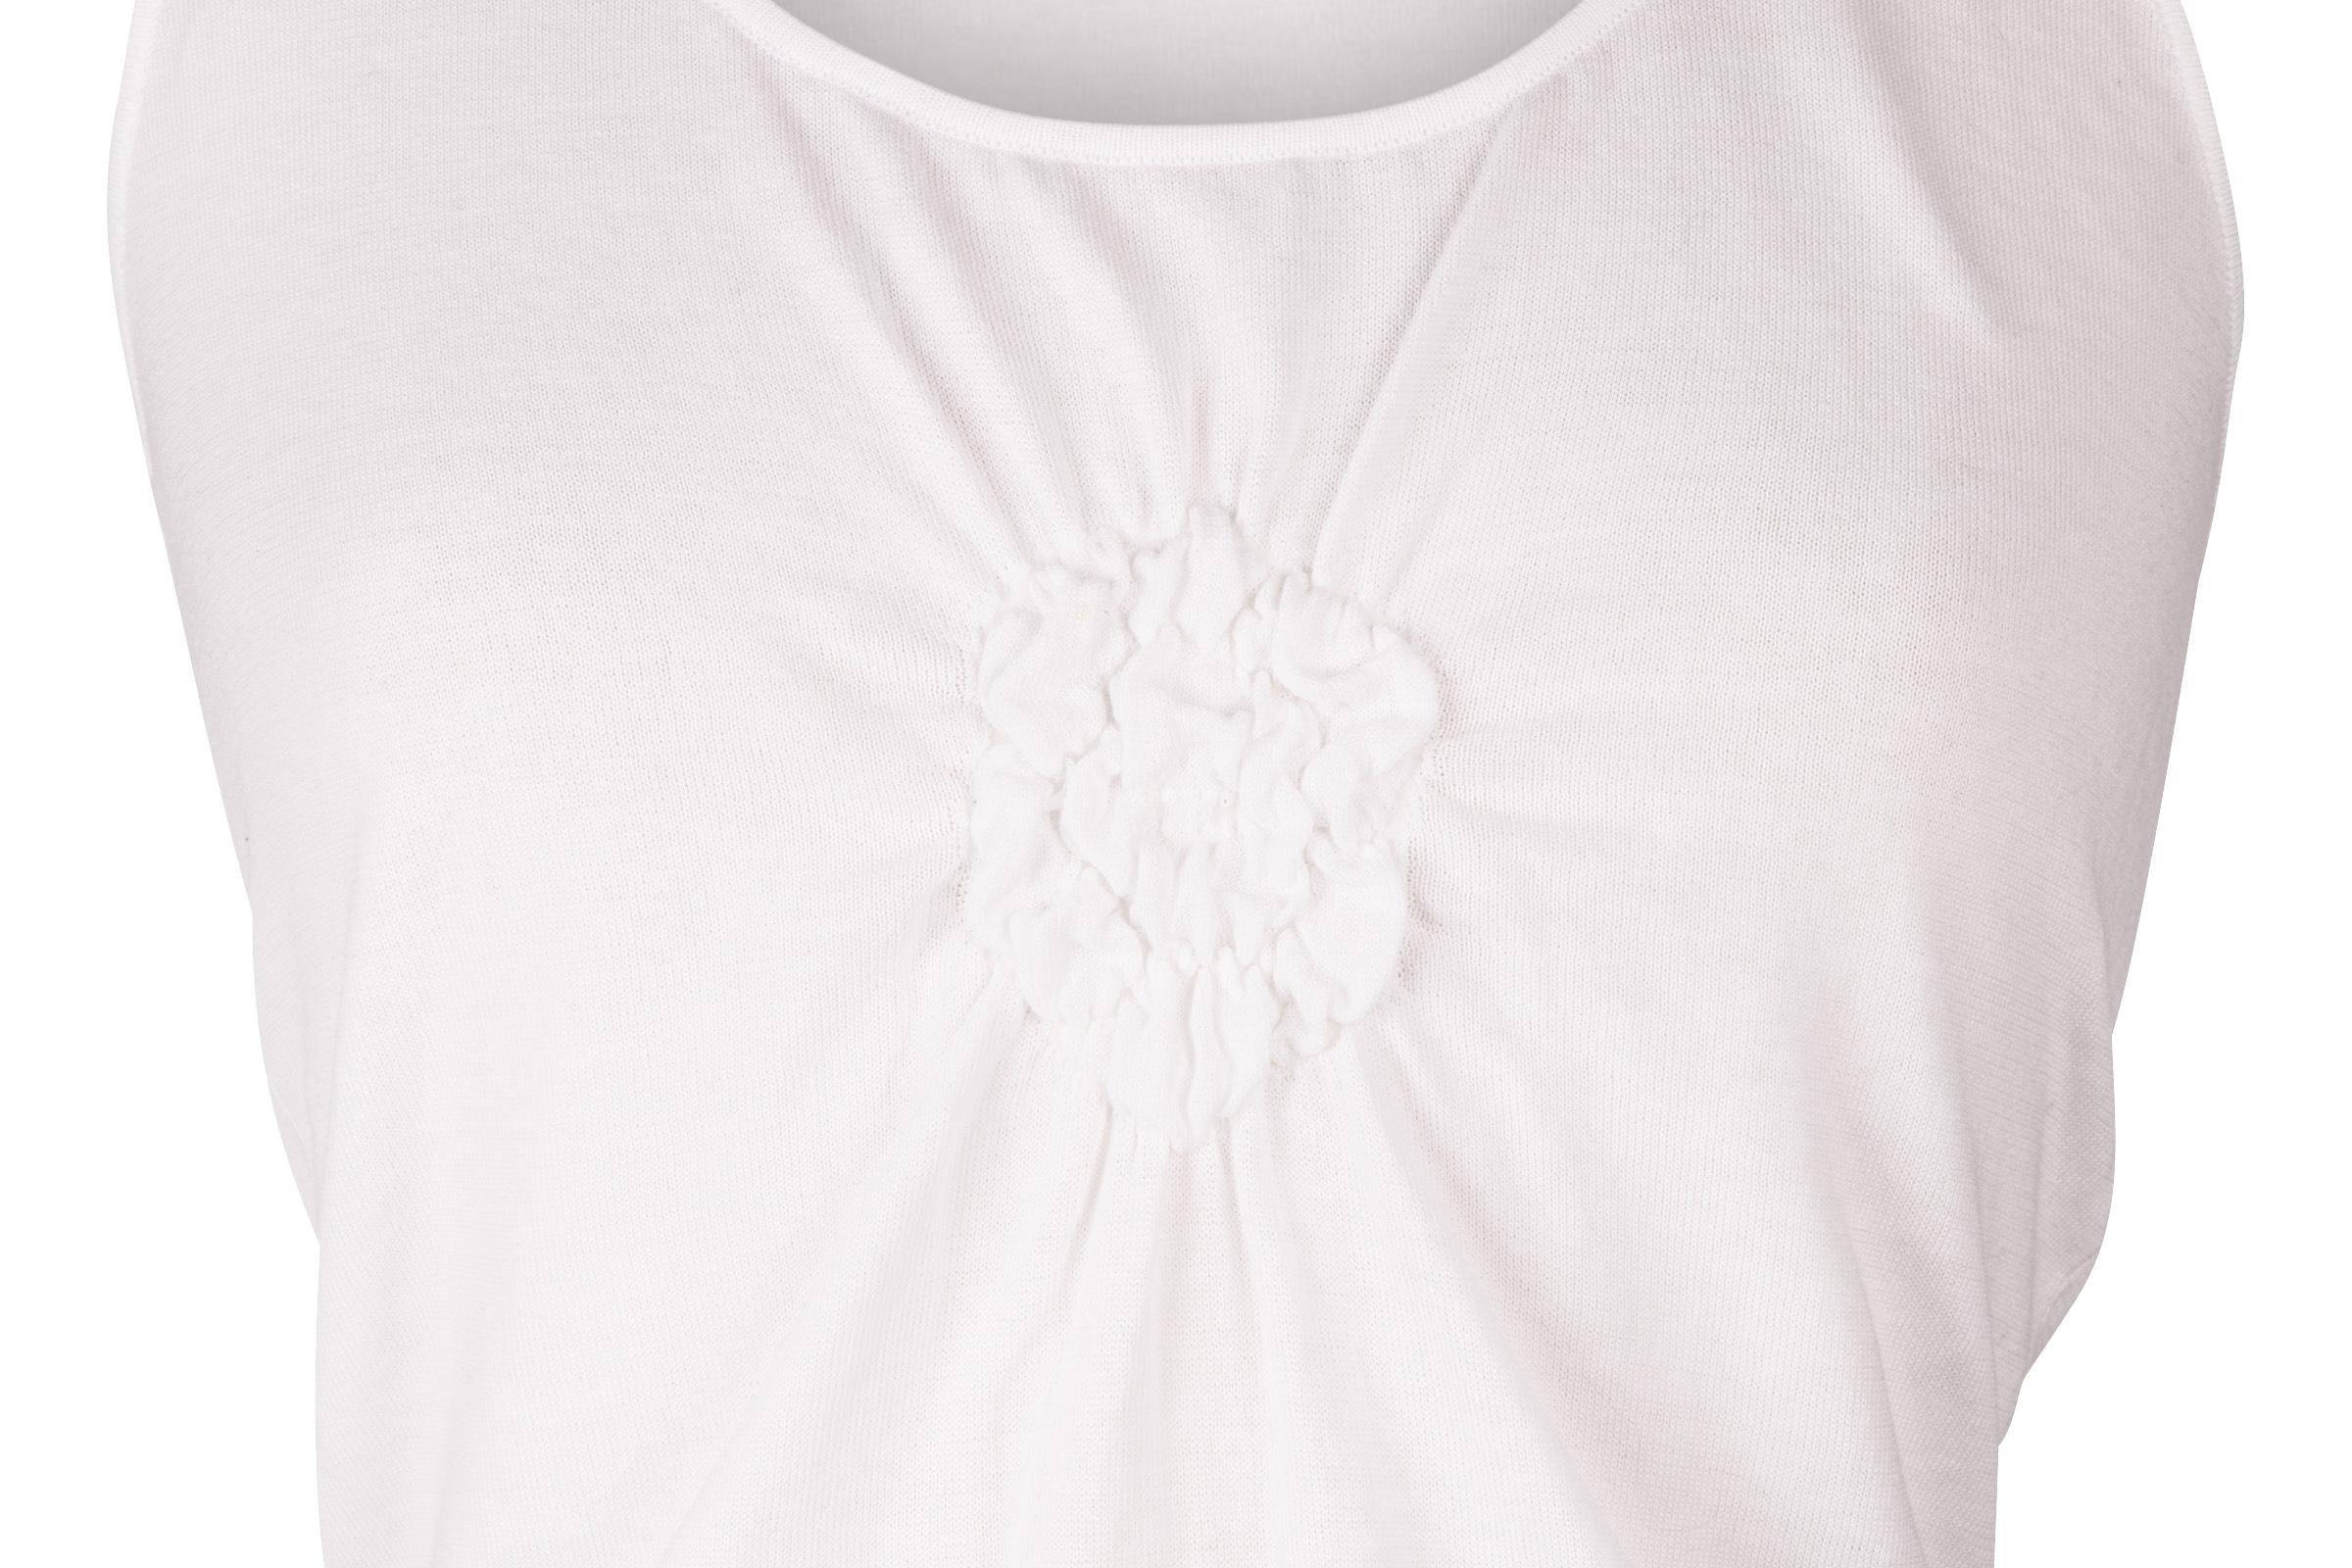 Guaranteed authentic Chanel 03C white camellia shell.  
Charming scoop neck with rouched camellia at center.
White knit sleeveless shell.
Ribbed bottom.
Very light weight.
Fabric is cotton and elastane.
final sale

SIZE 42 
USA SIZE 8 

TOP